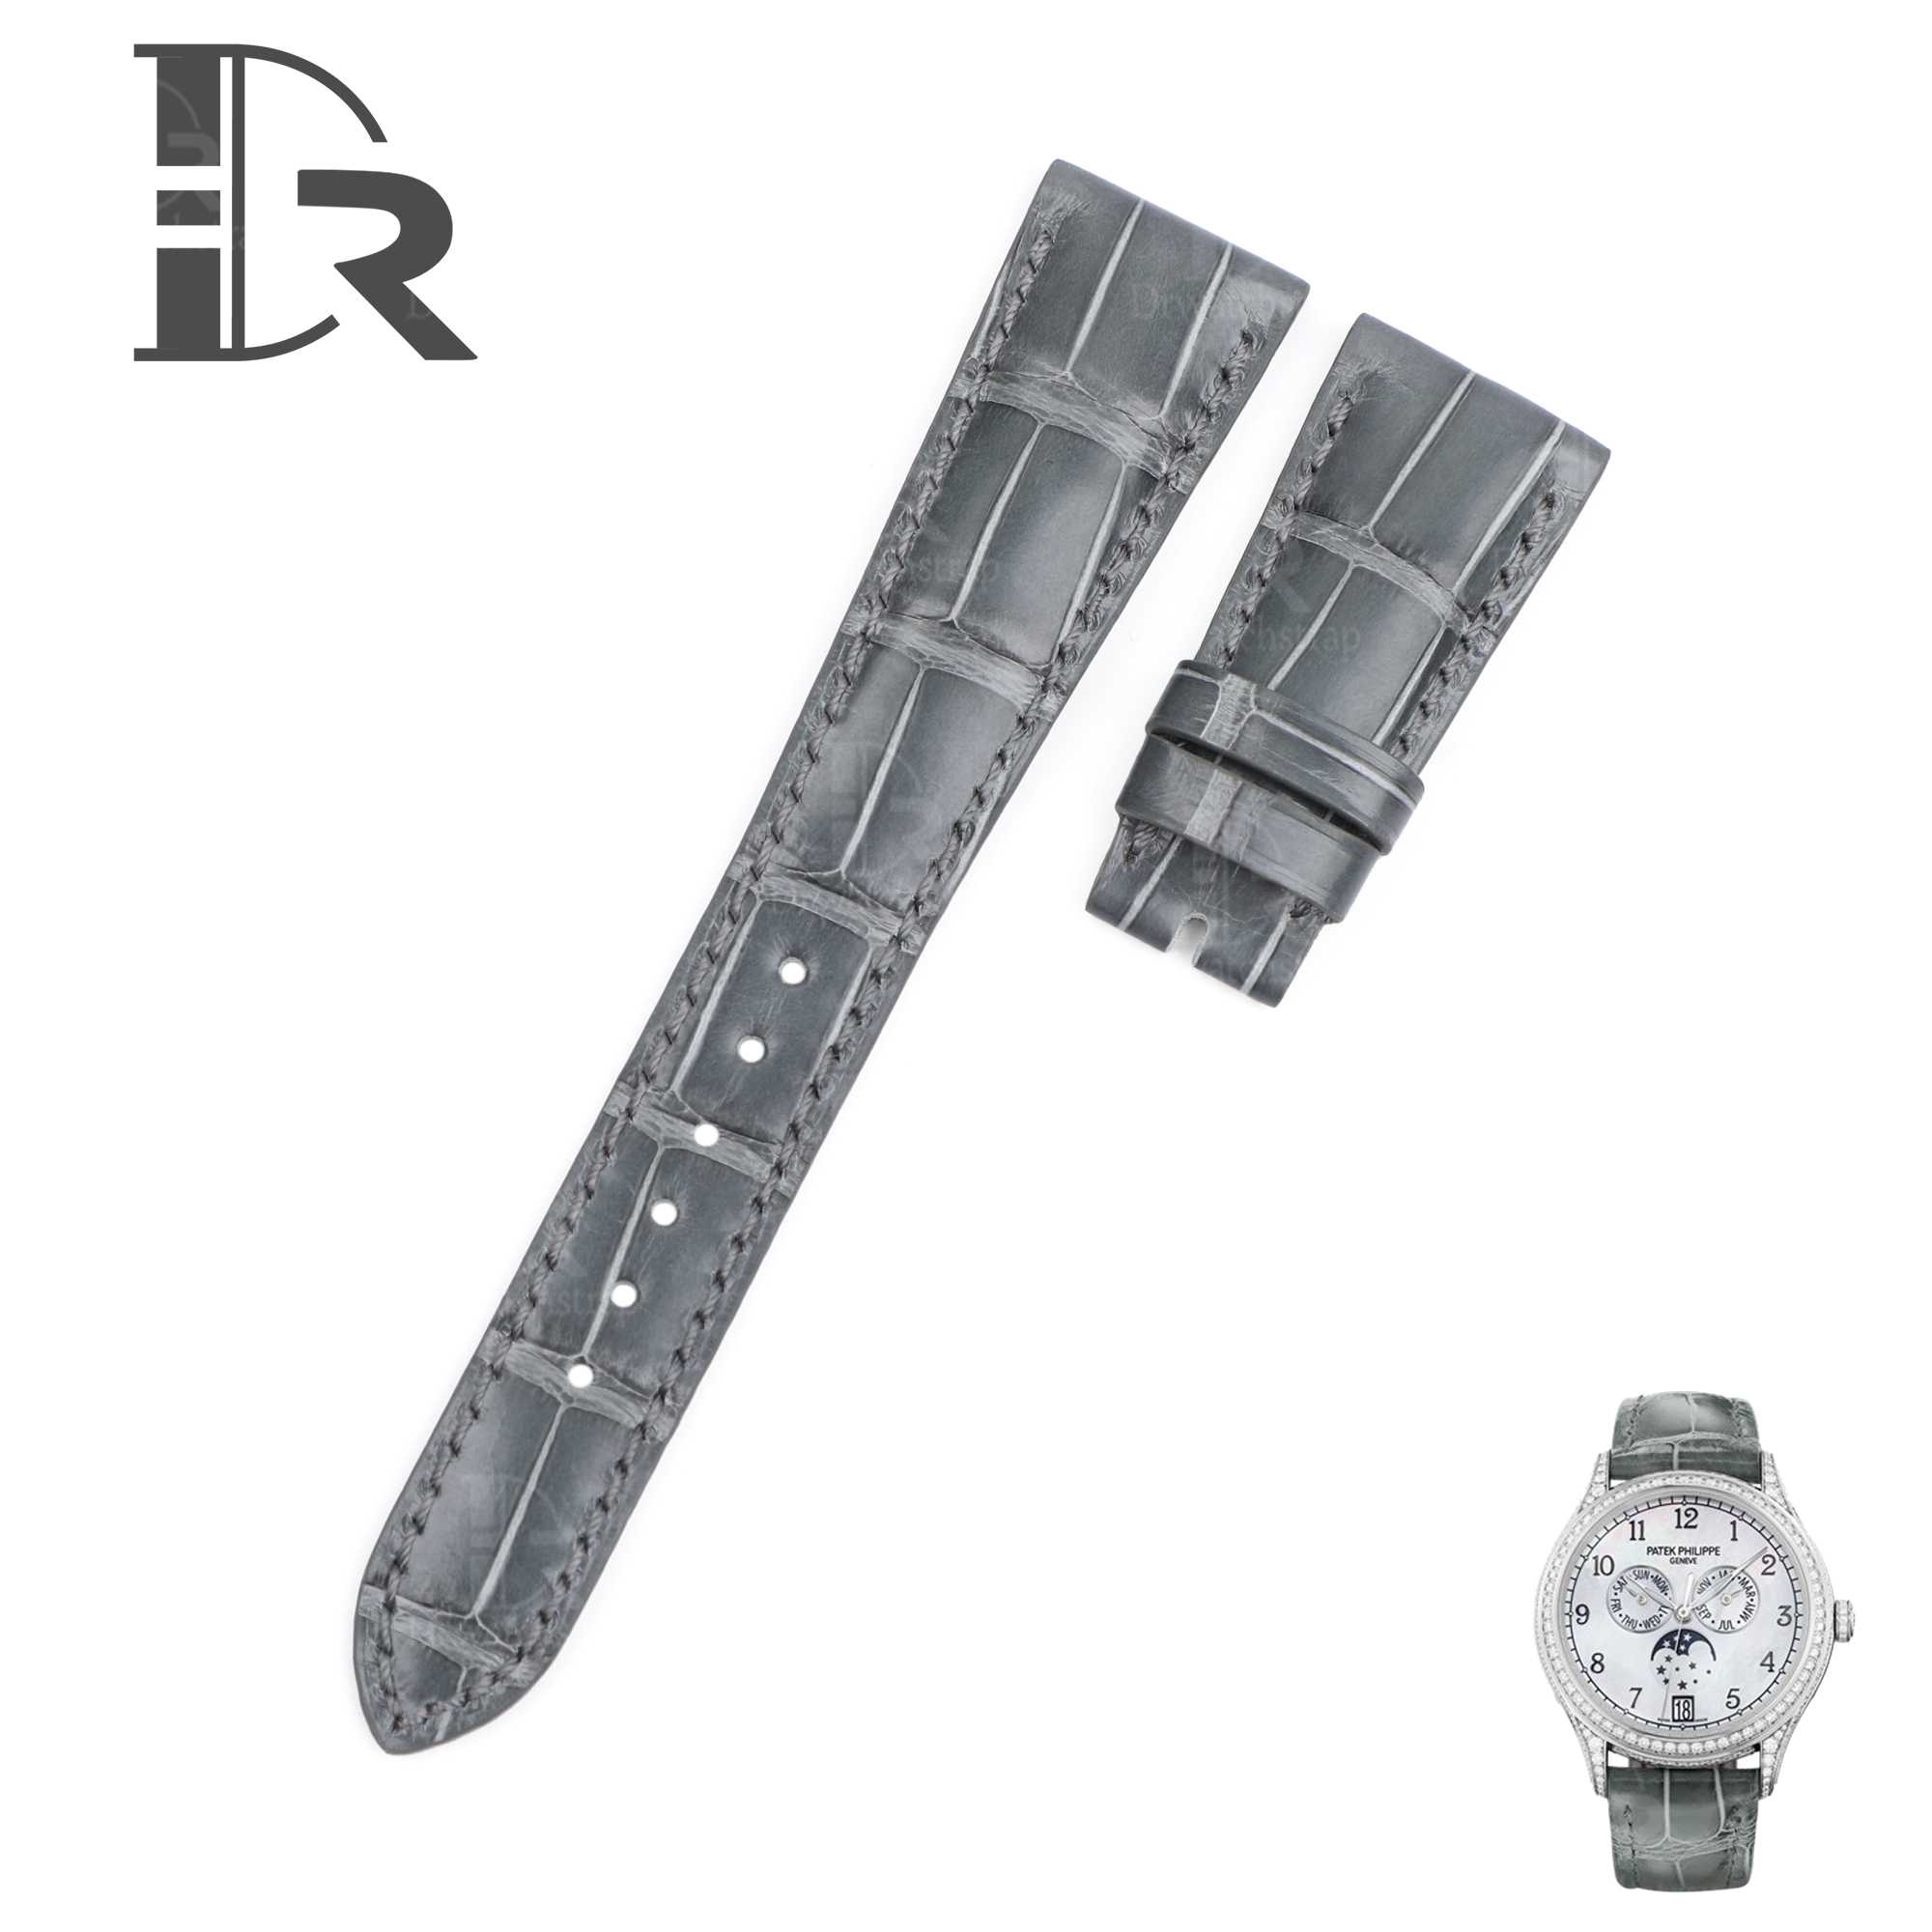 Patek Philippe grand strap - Alligator Leather - Pale Grey Replacement watch band